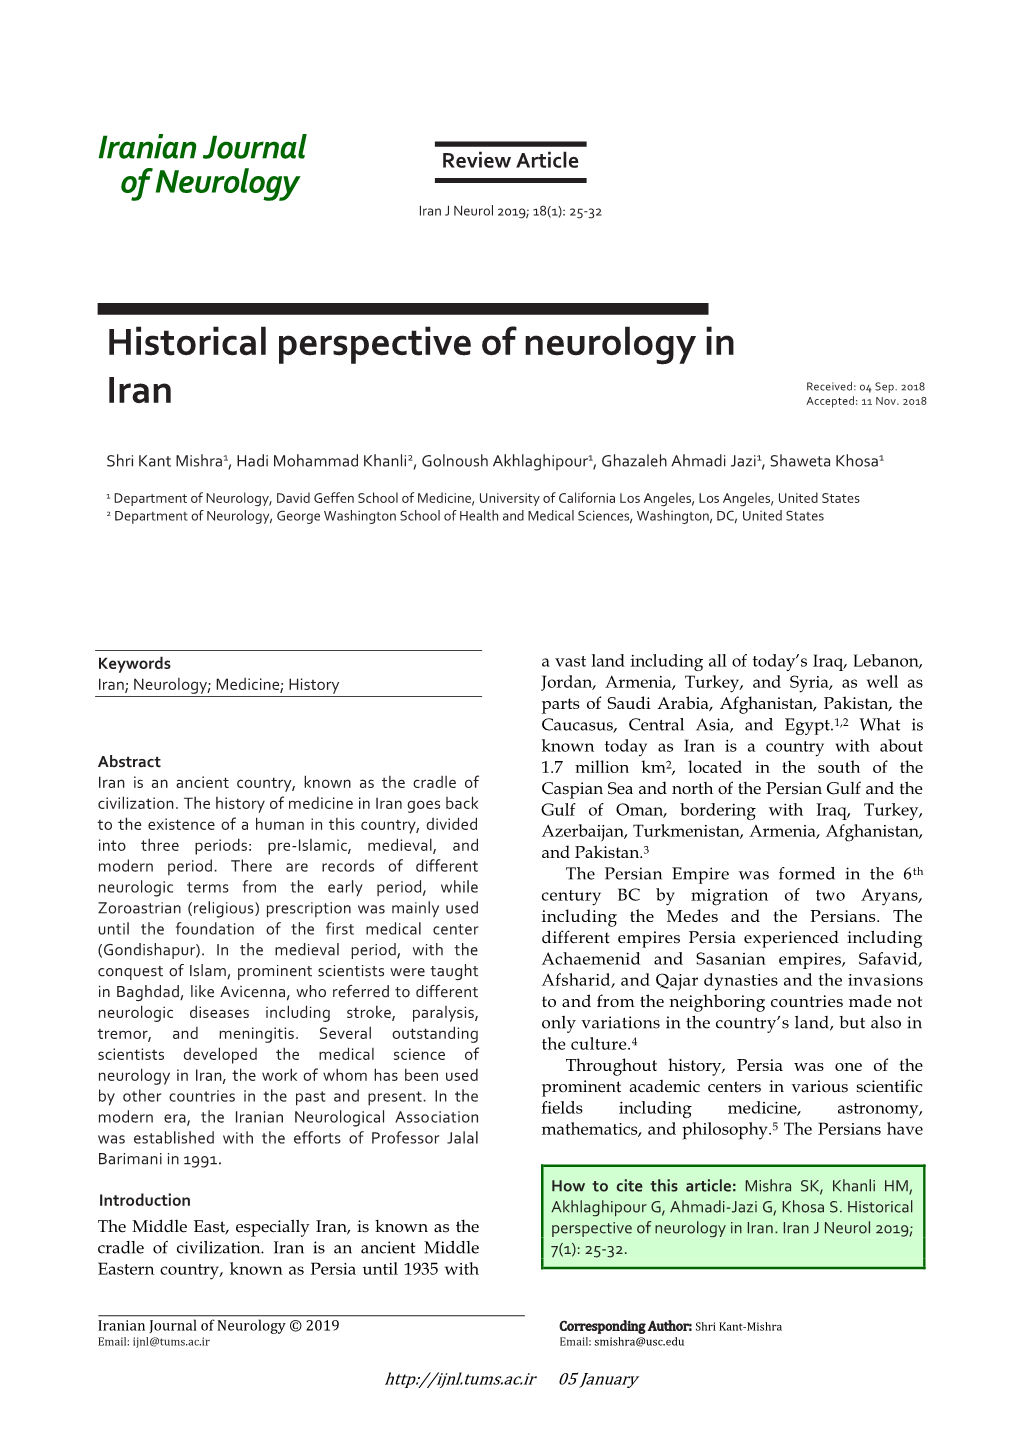 Historical Perspective of Neurology in Iran